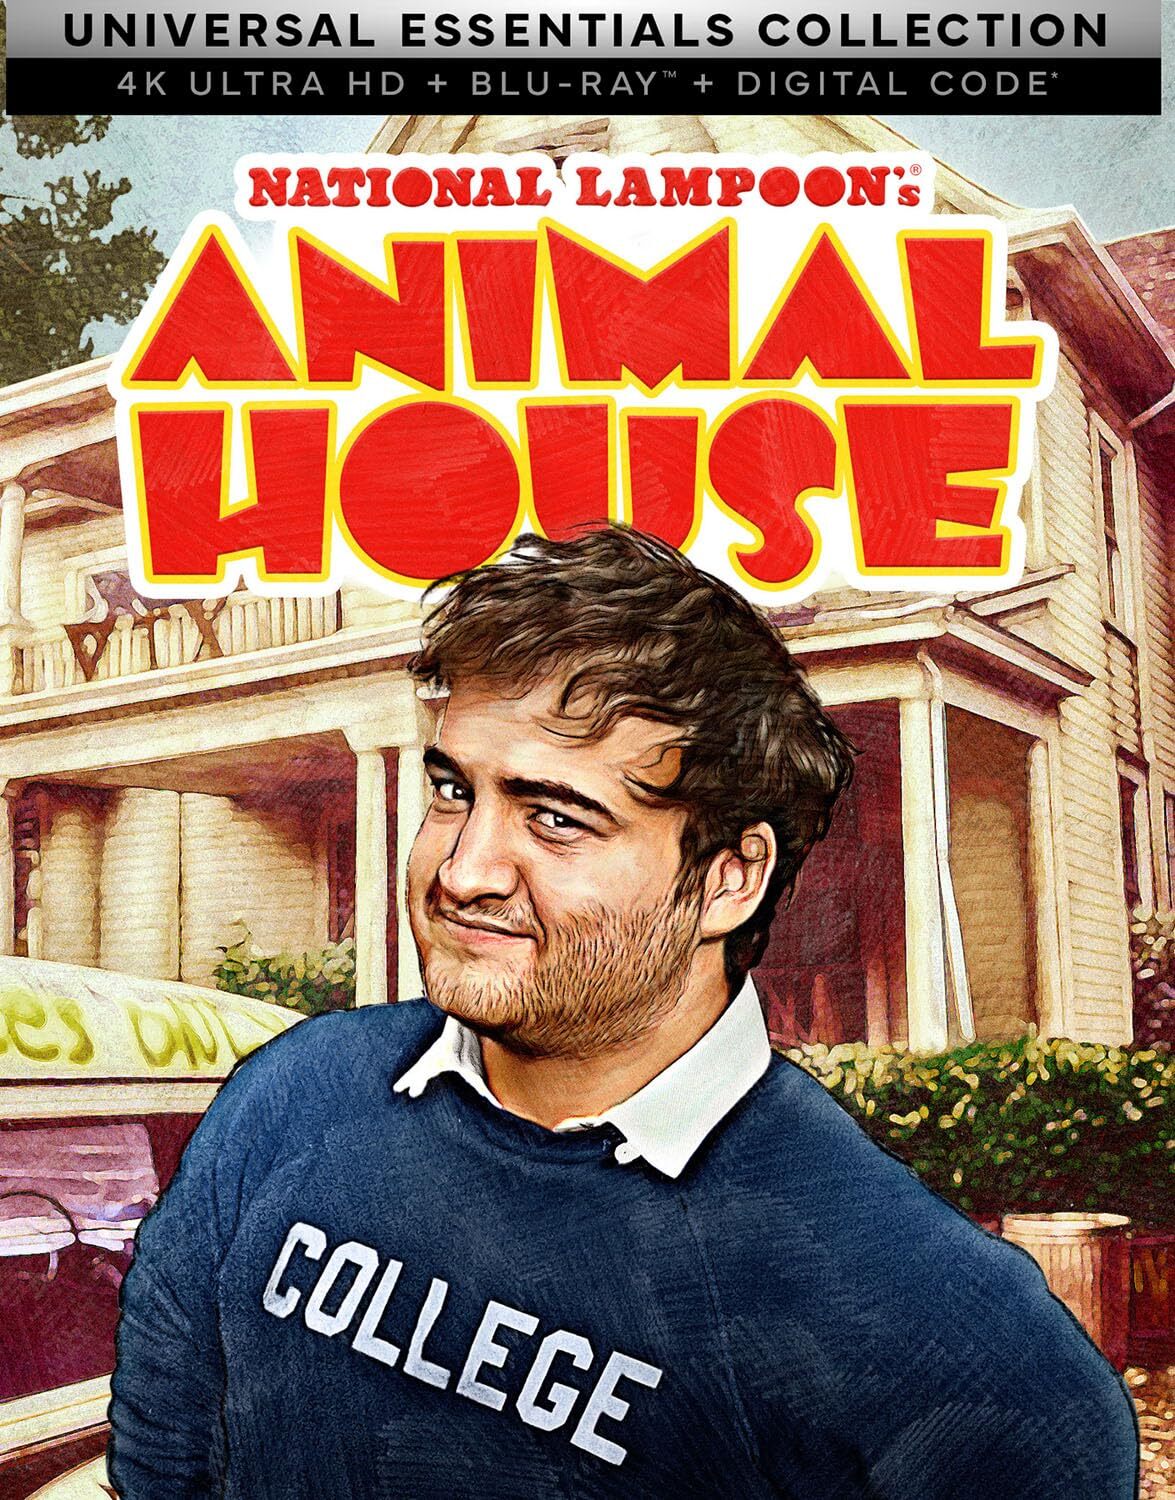 Animal House 4K: Universal Essentials Collection - 45th Anniversary Edition